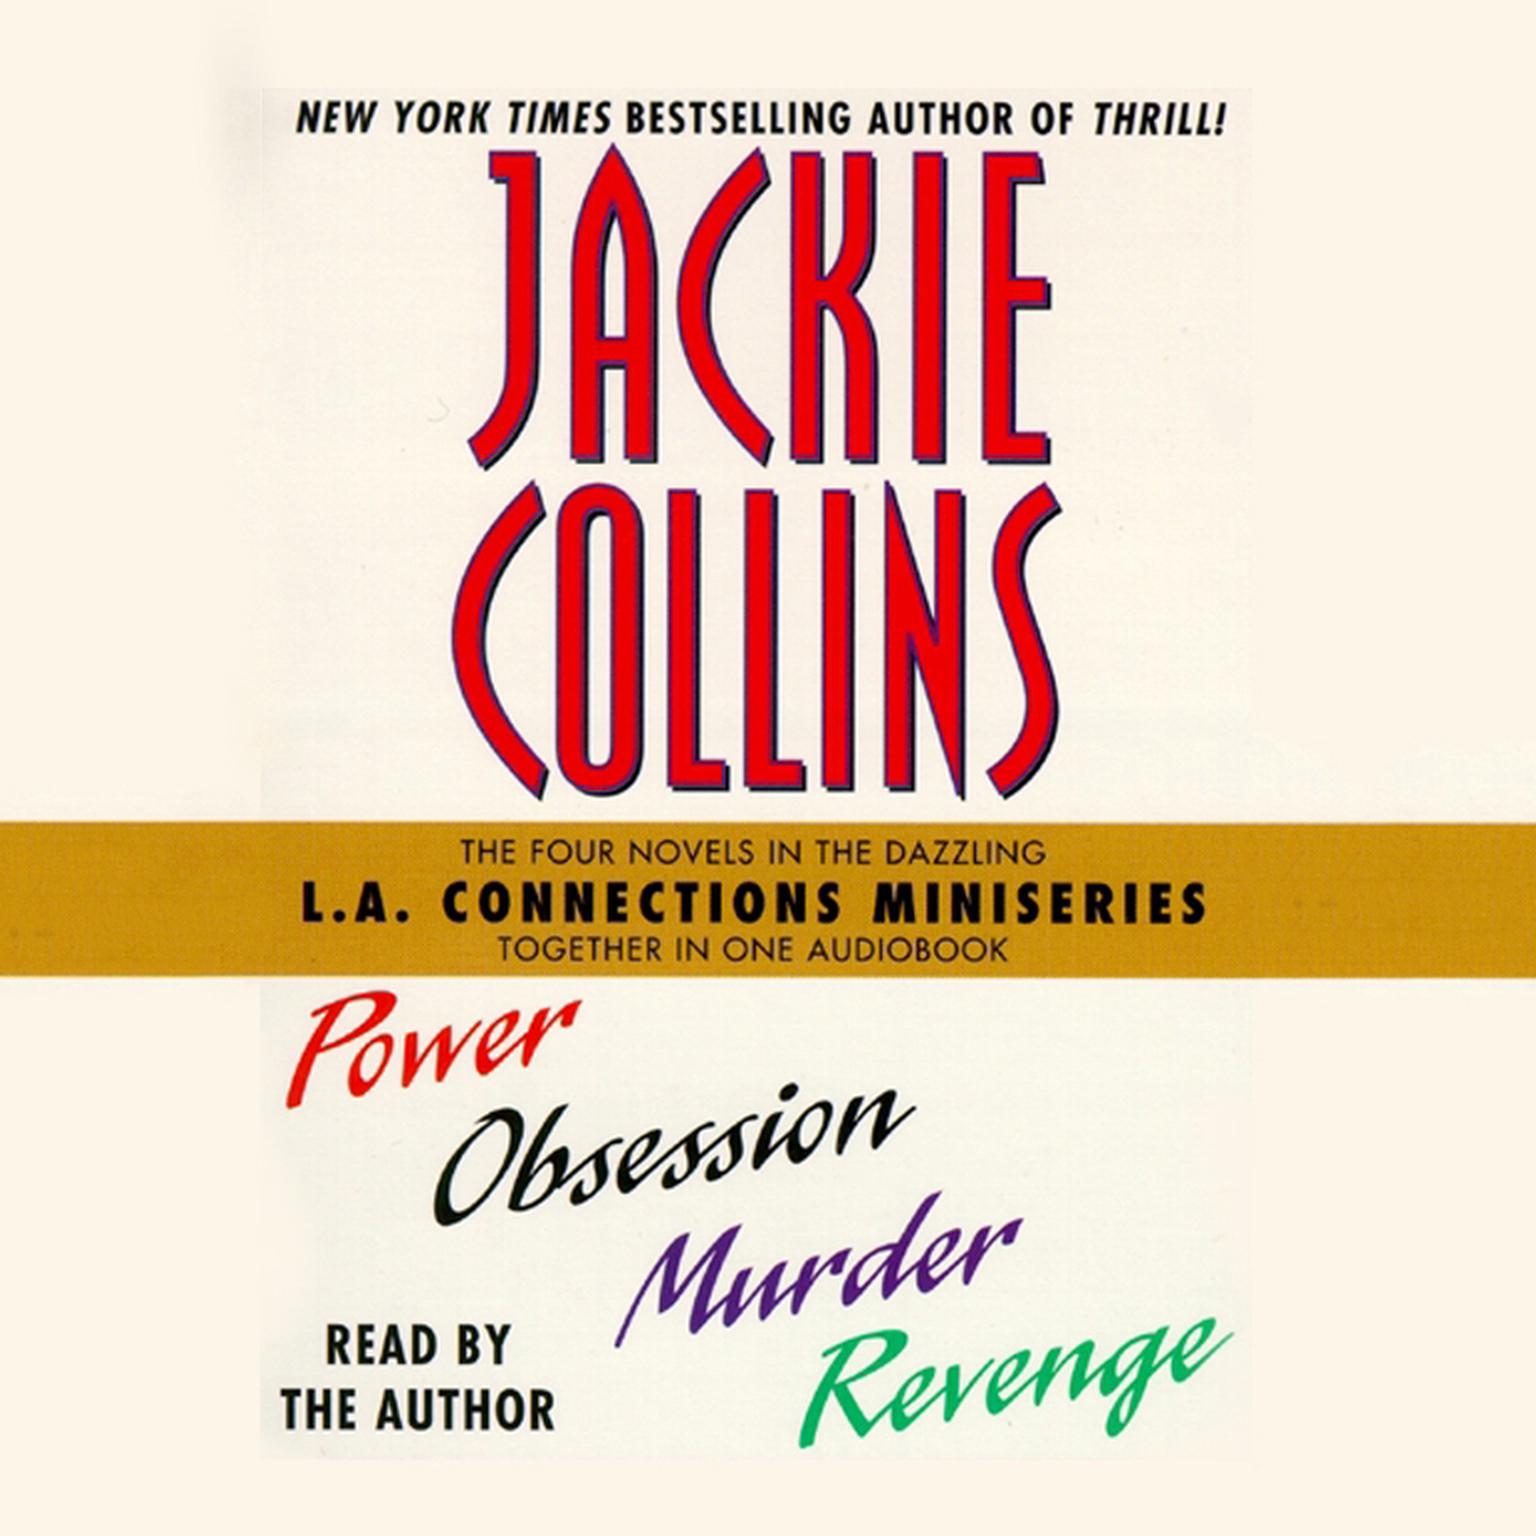 L.A Connections (Abridged): Power, Obsession, Murder, Revenge Audiobook, by Jackie Collins